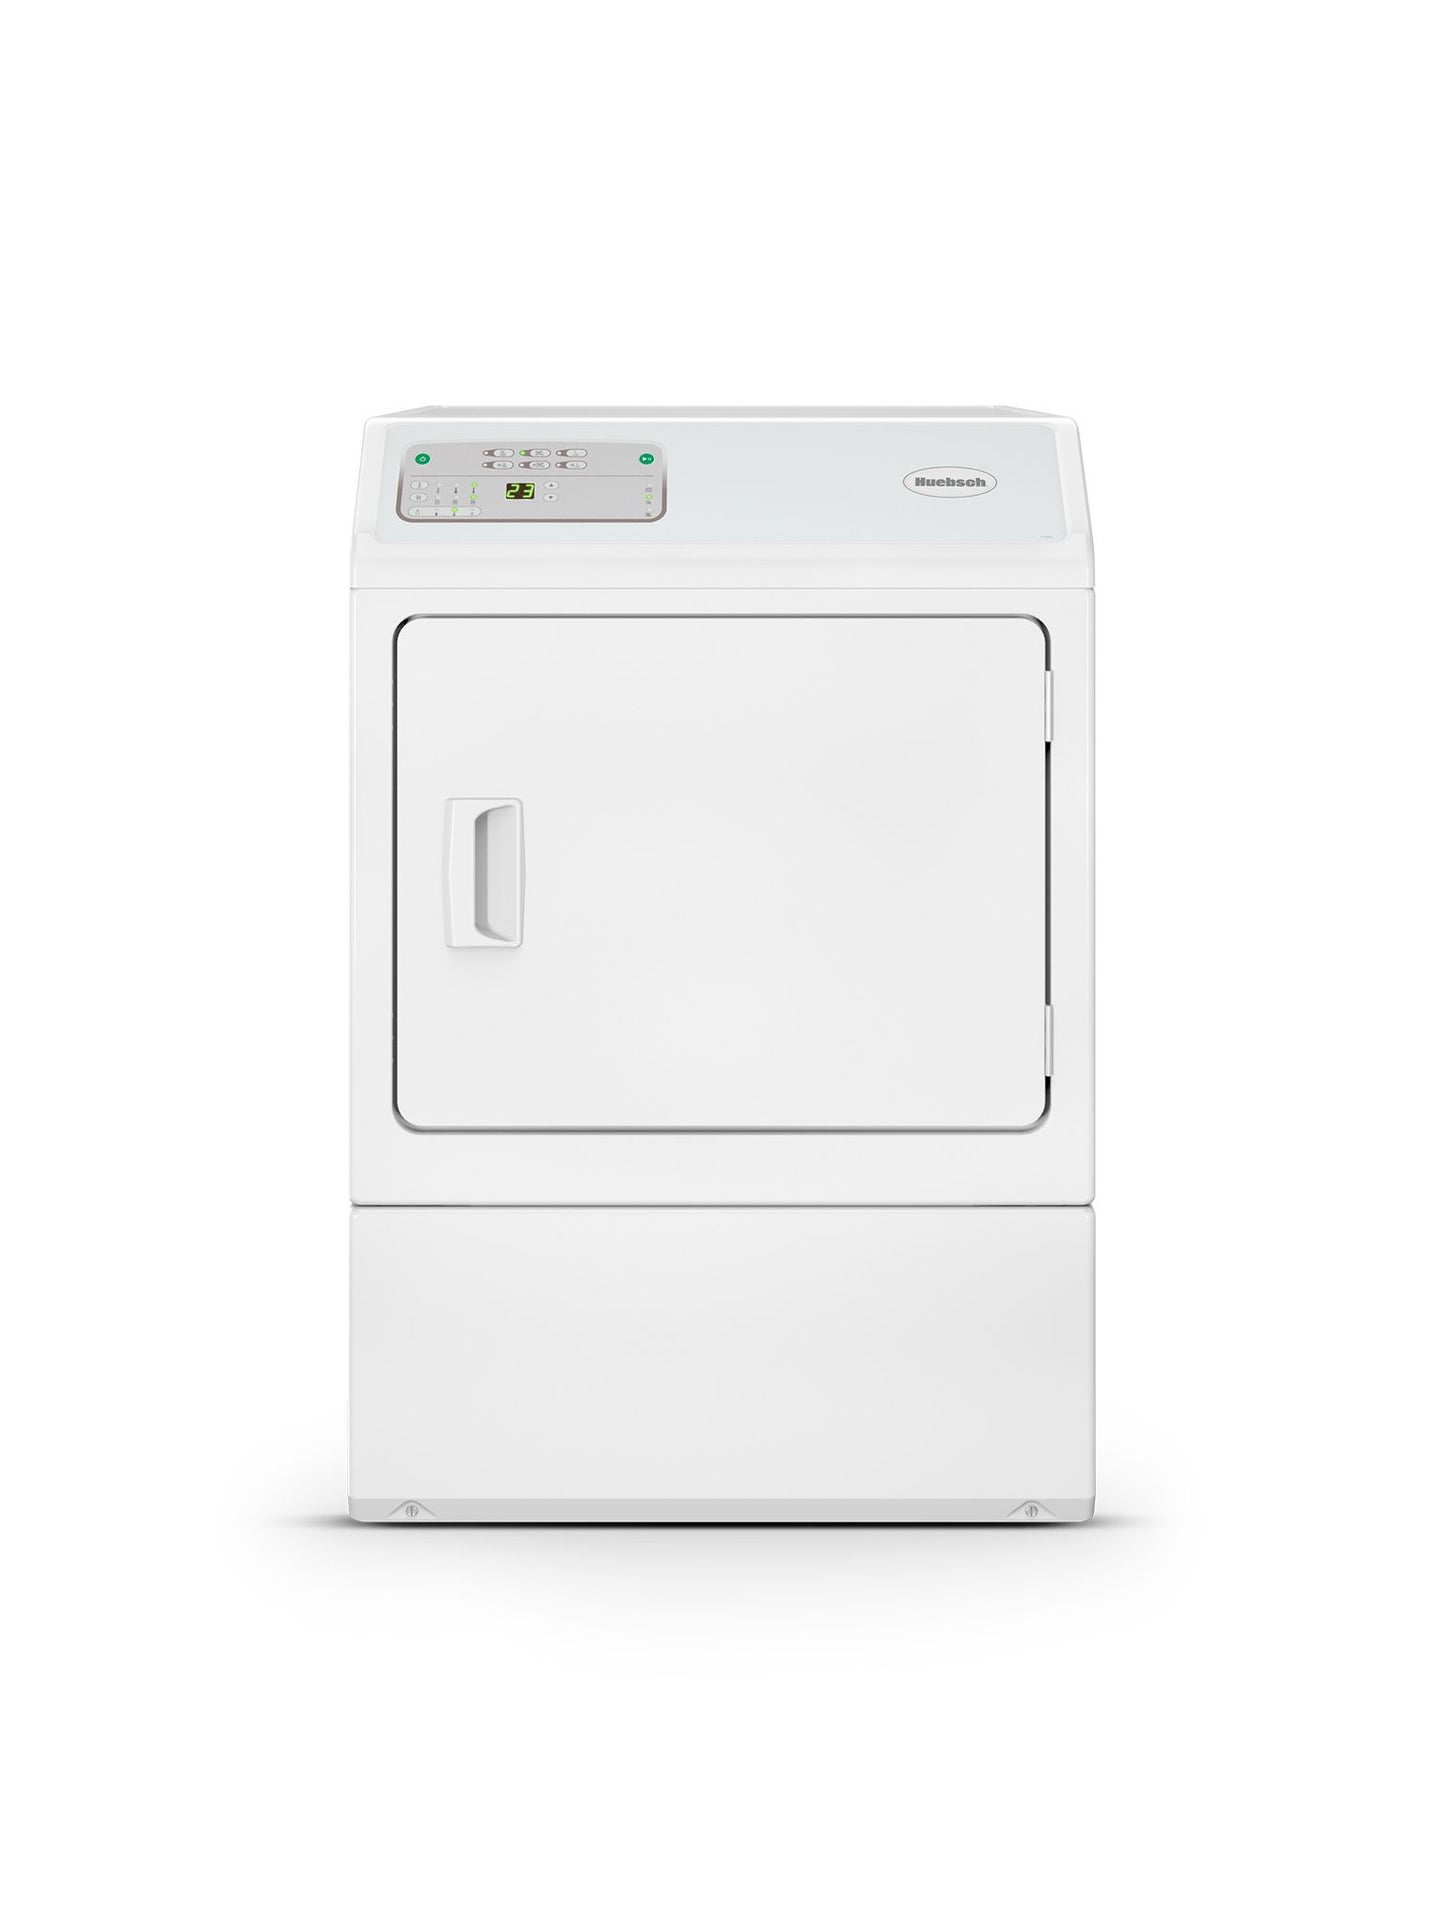 ON-PREMISE FRONT CONTROL SINGLE DRYER – ELECTRONIC